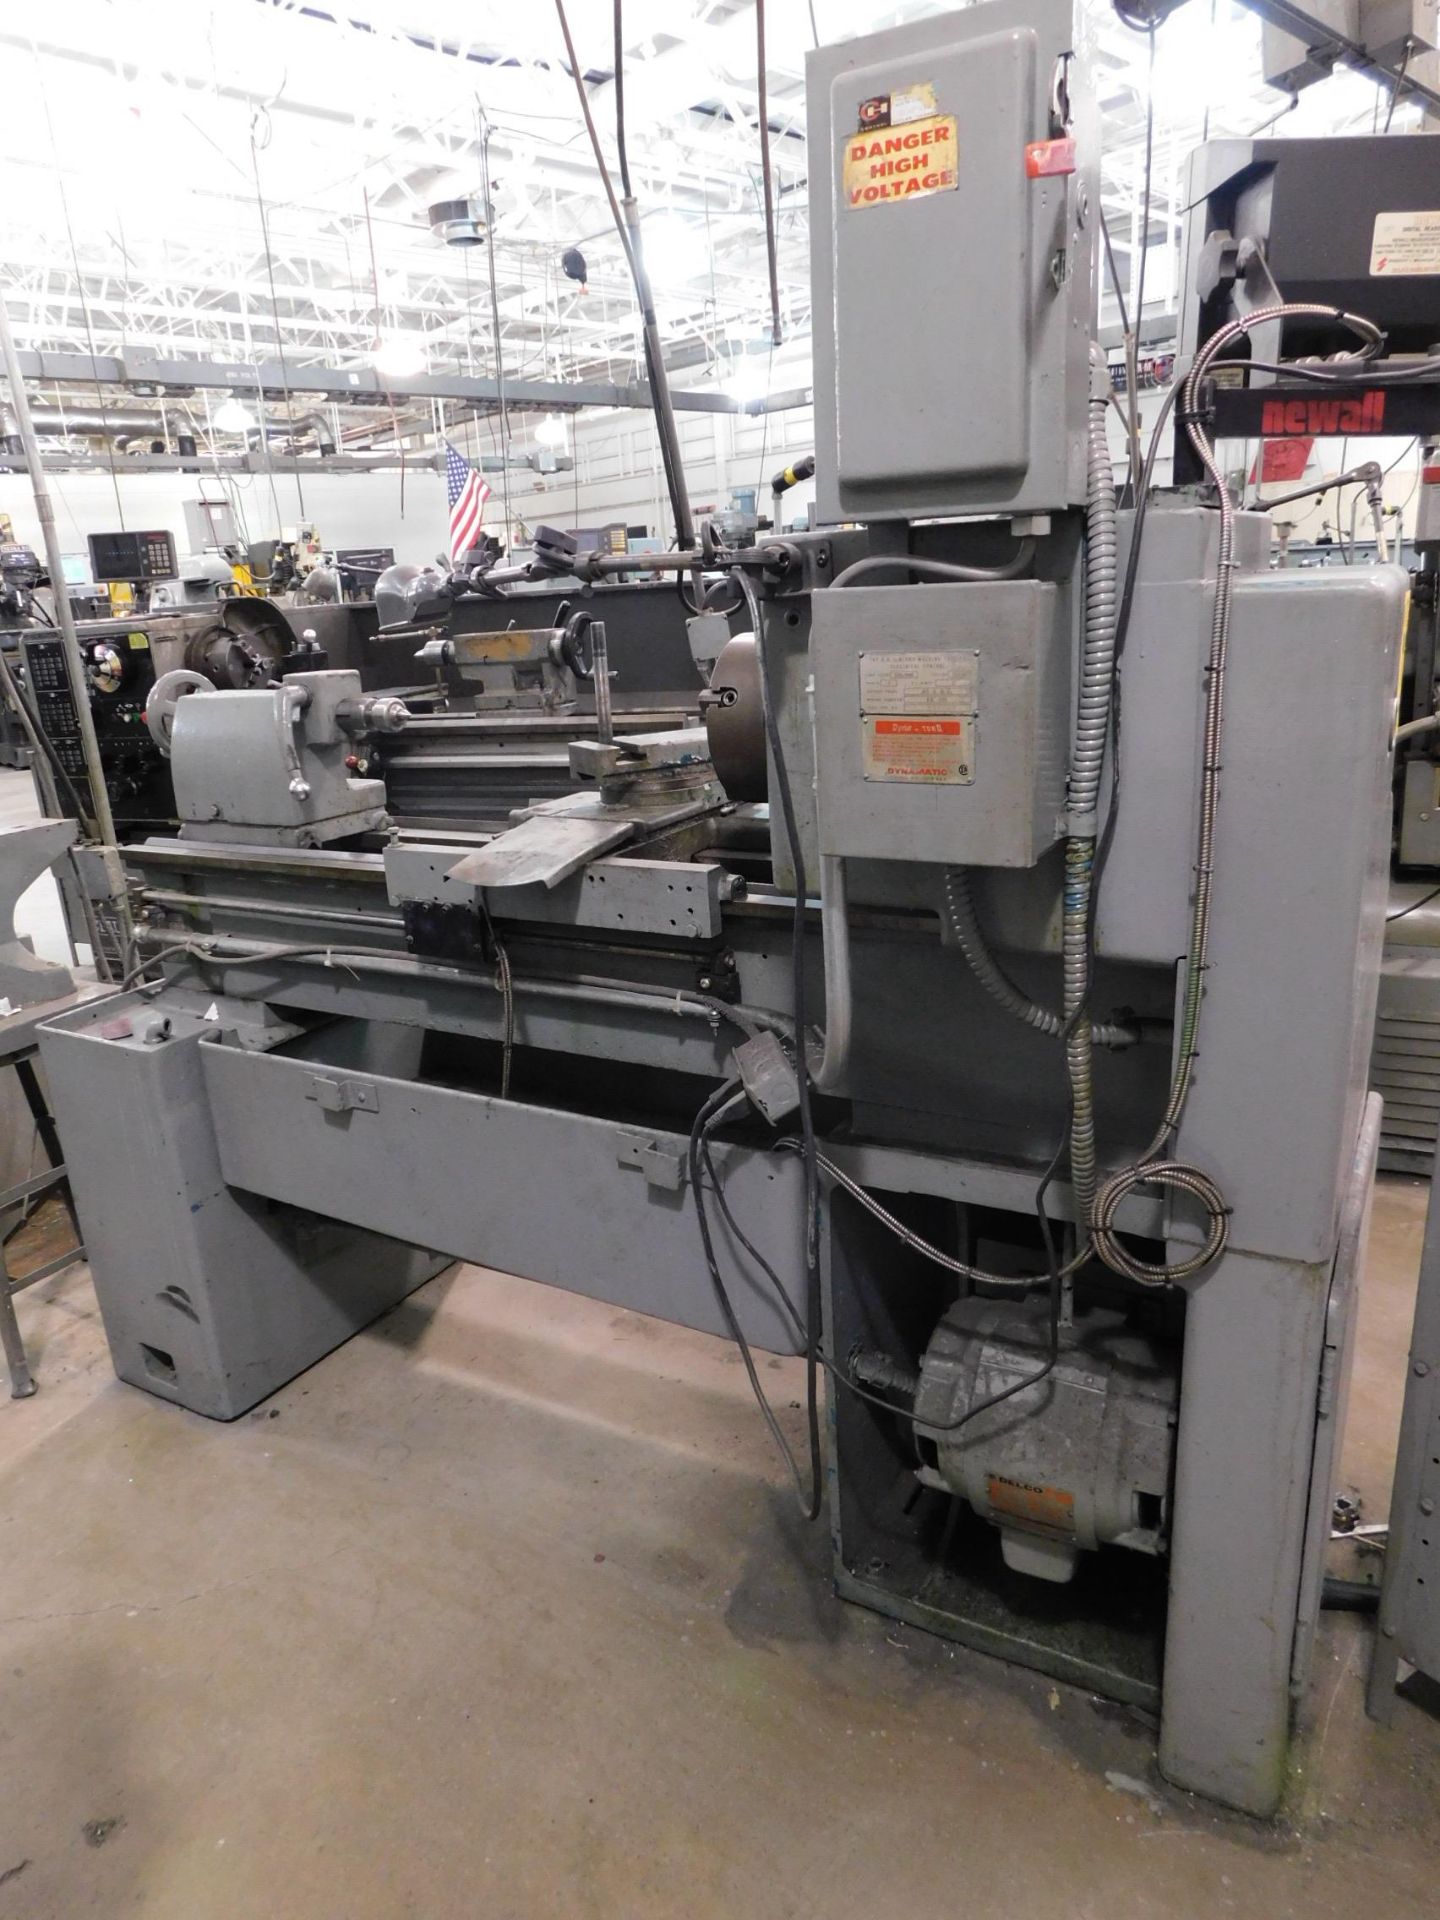 Leblond 16" x 30" Toolroom Lathe, SN 7C2159 with Newall DP7 2-Axis Digital Readout - Image 10 of 11